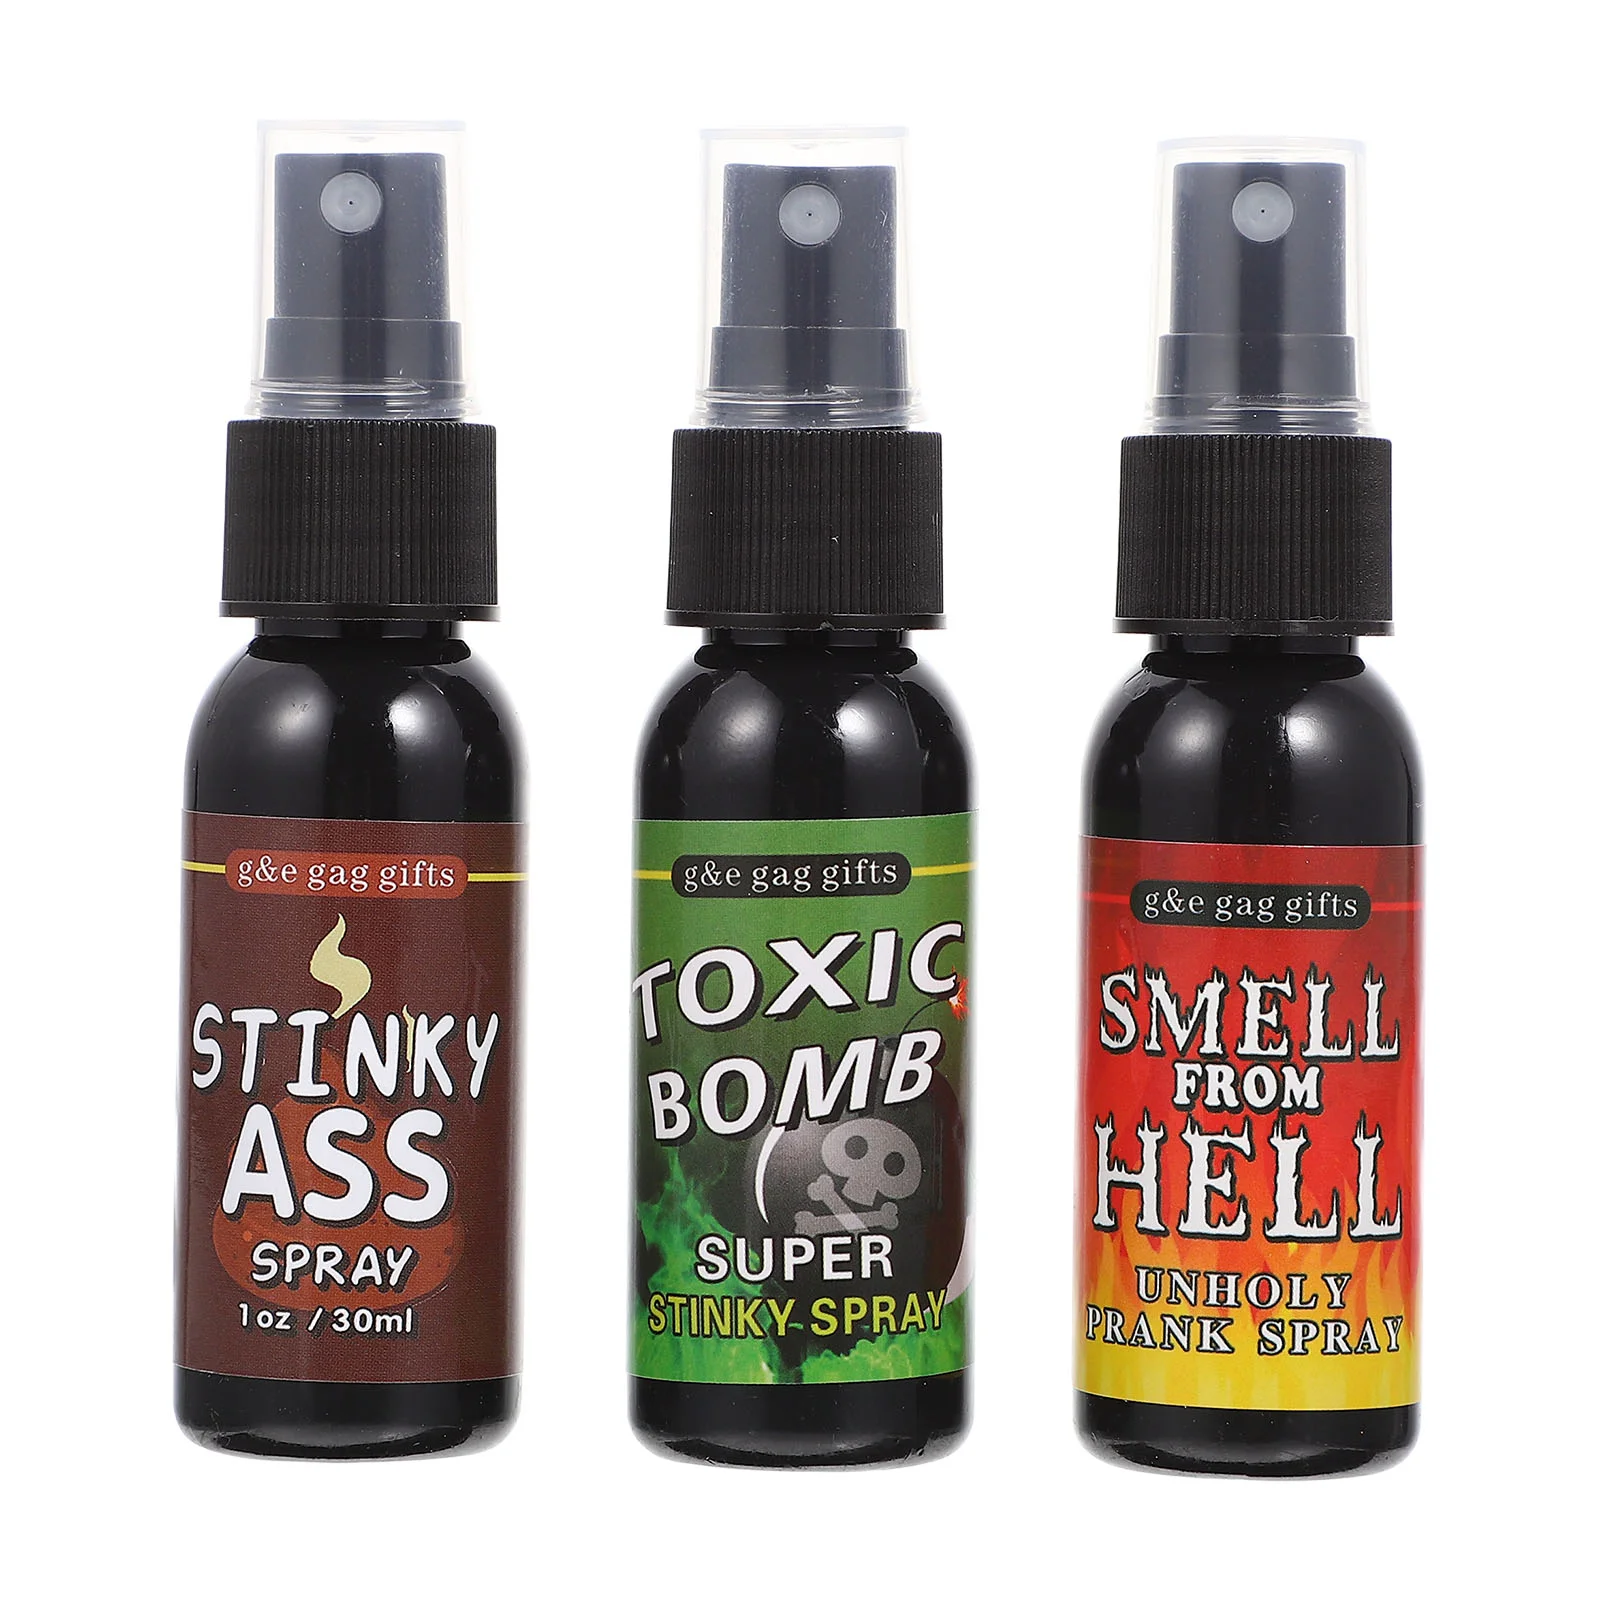 

Spray Fart Prankparty Smell Smelly Prop Bombstinky Extra Funny Stink Liquid Trick Supplies Gag Ass Wet Fartingworstpotent